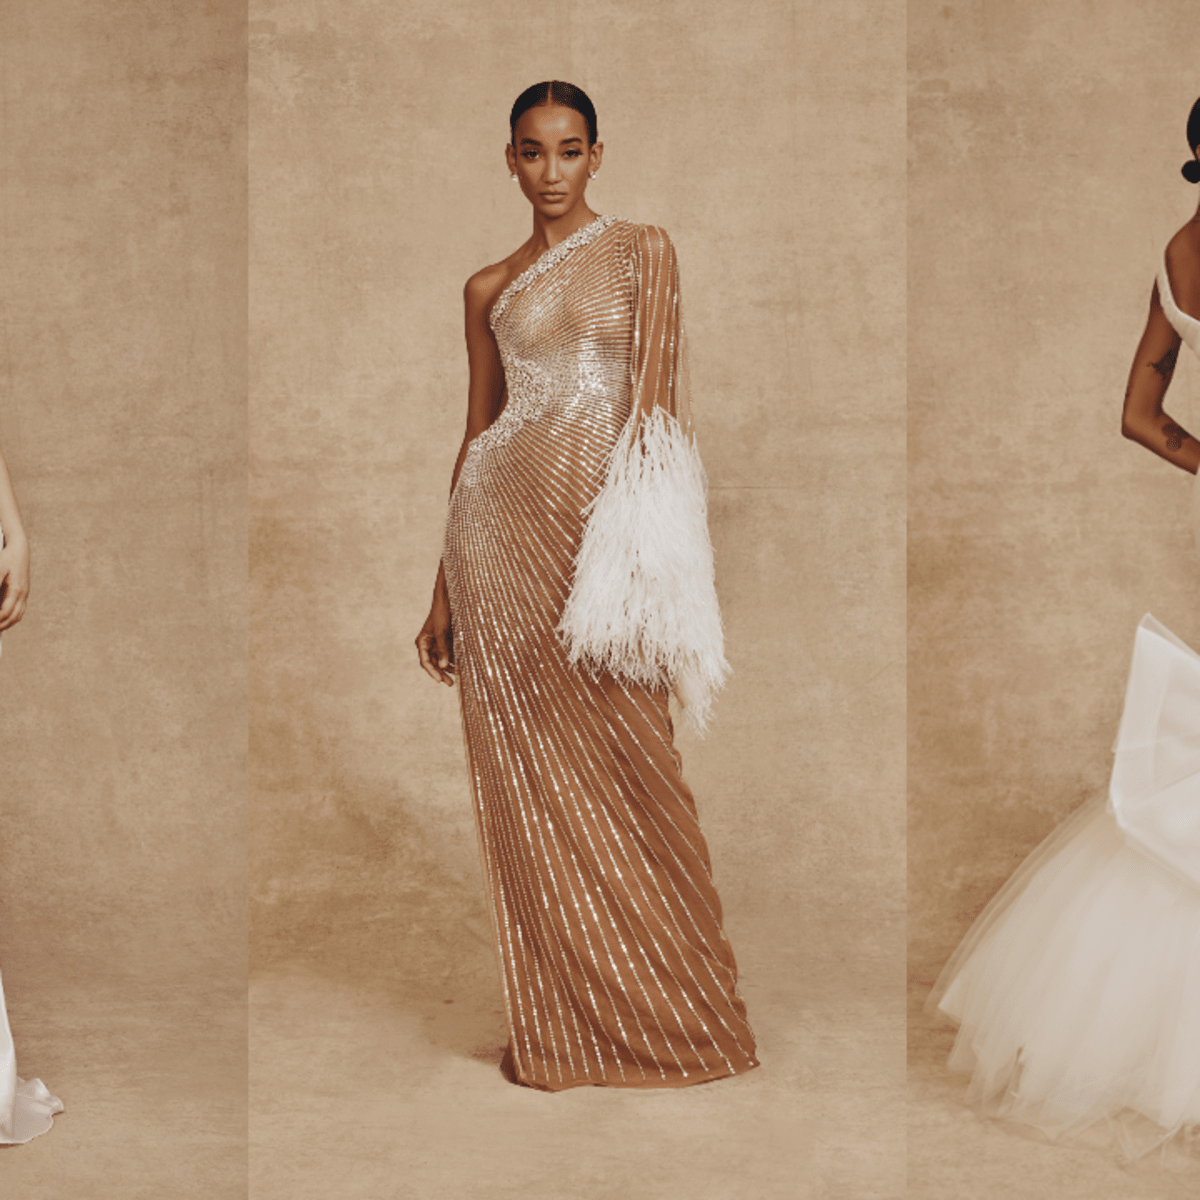 Hanifa's Debut Bridal Collection Will Make You Want to Get Married